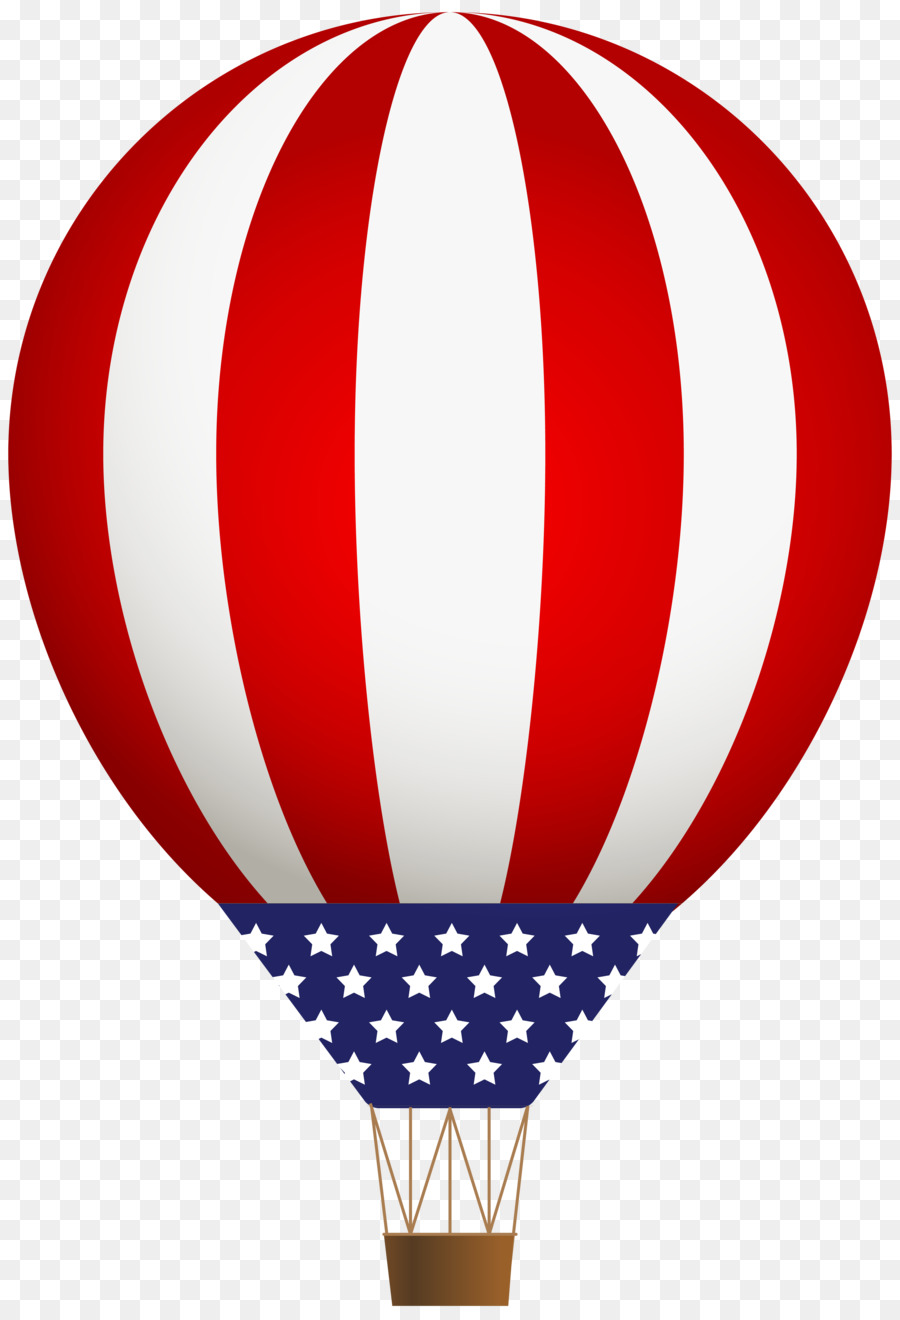 Hot air balloon Clip art - fourth of july png download - 5462*8000 - Free Transparent Balloon png Download.